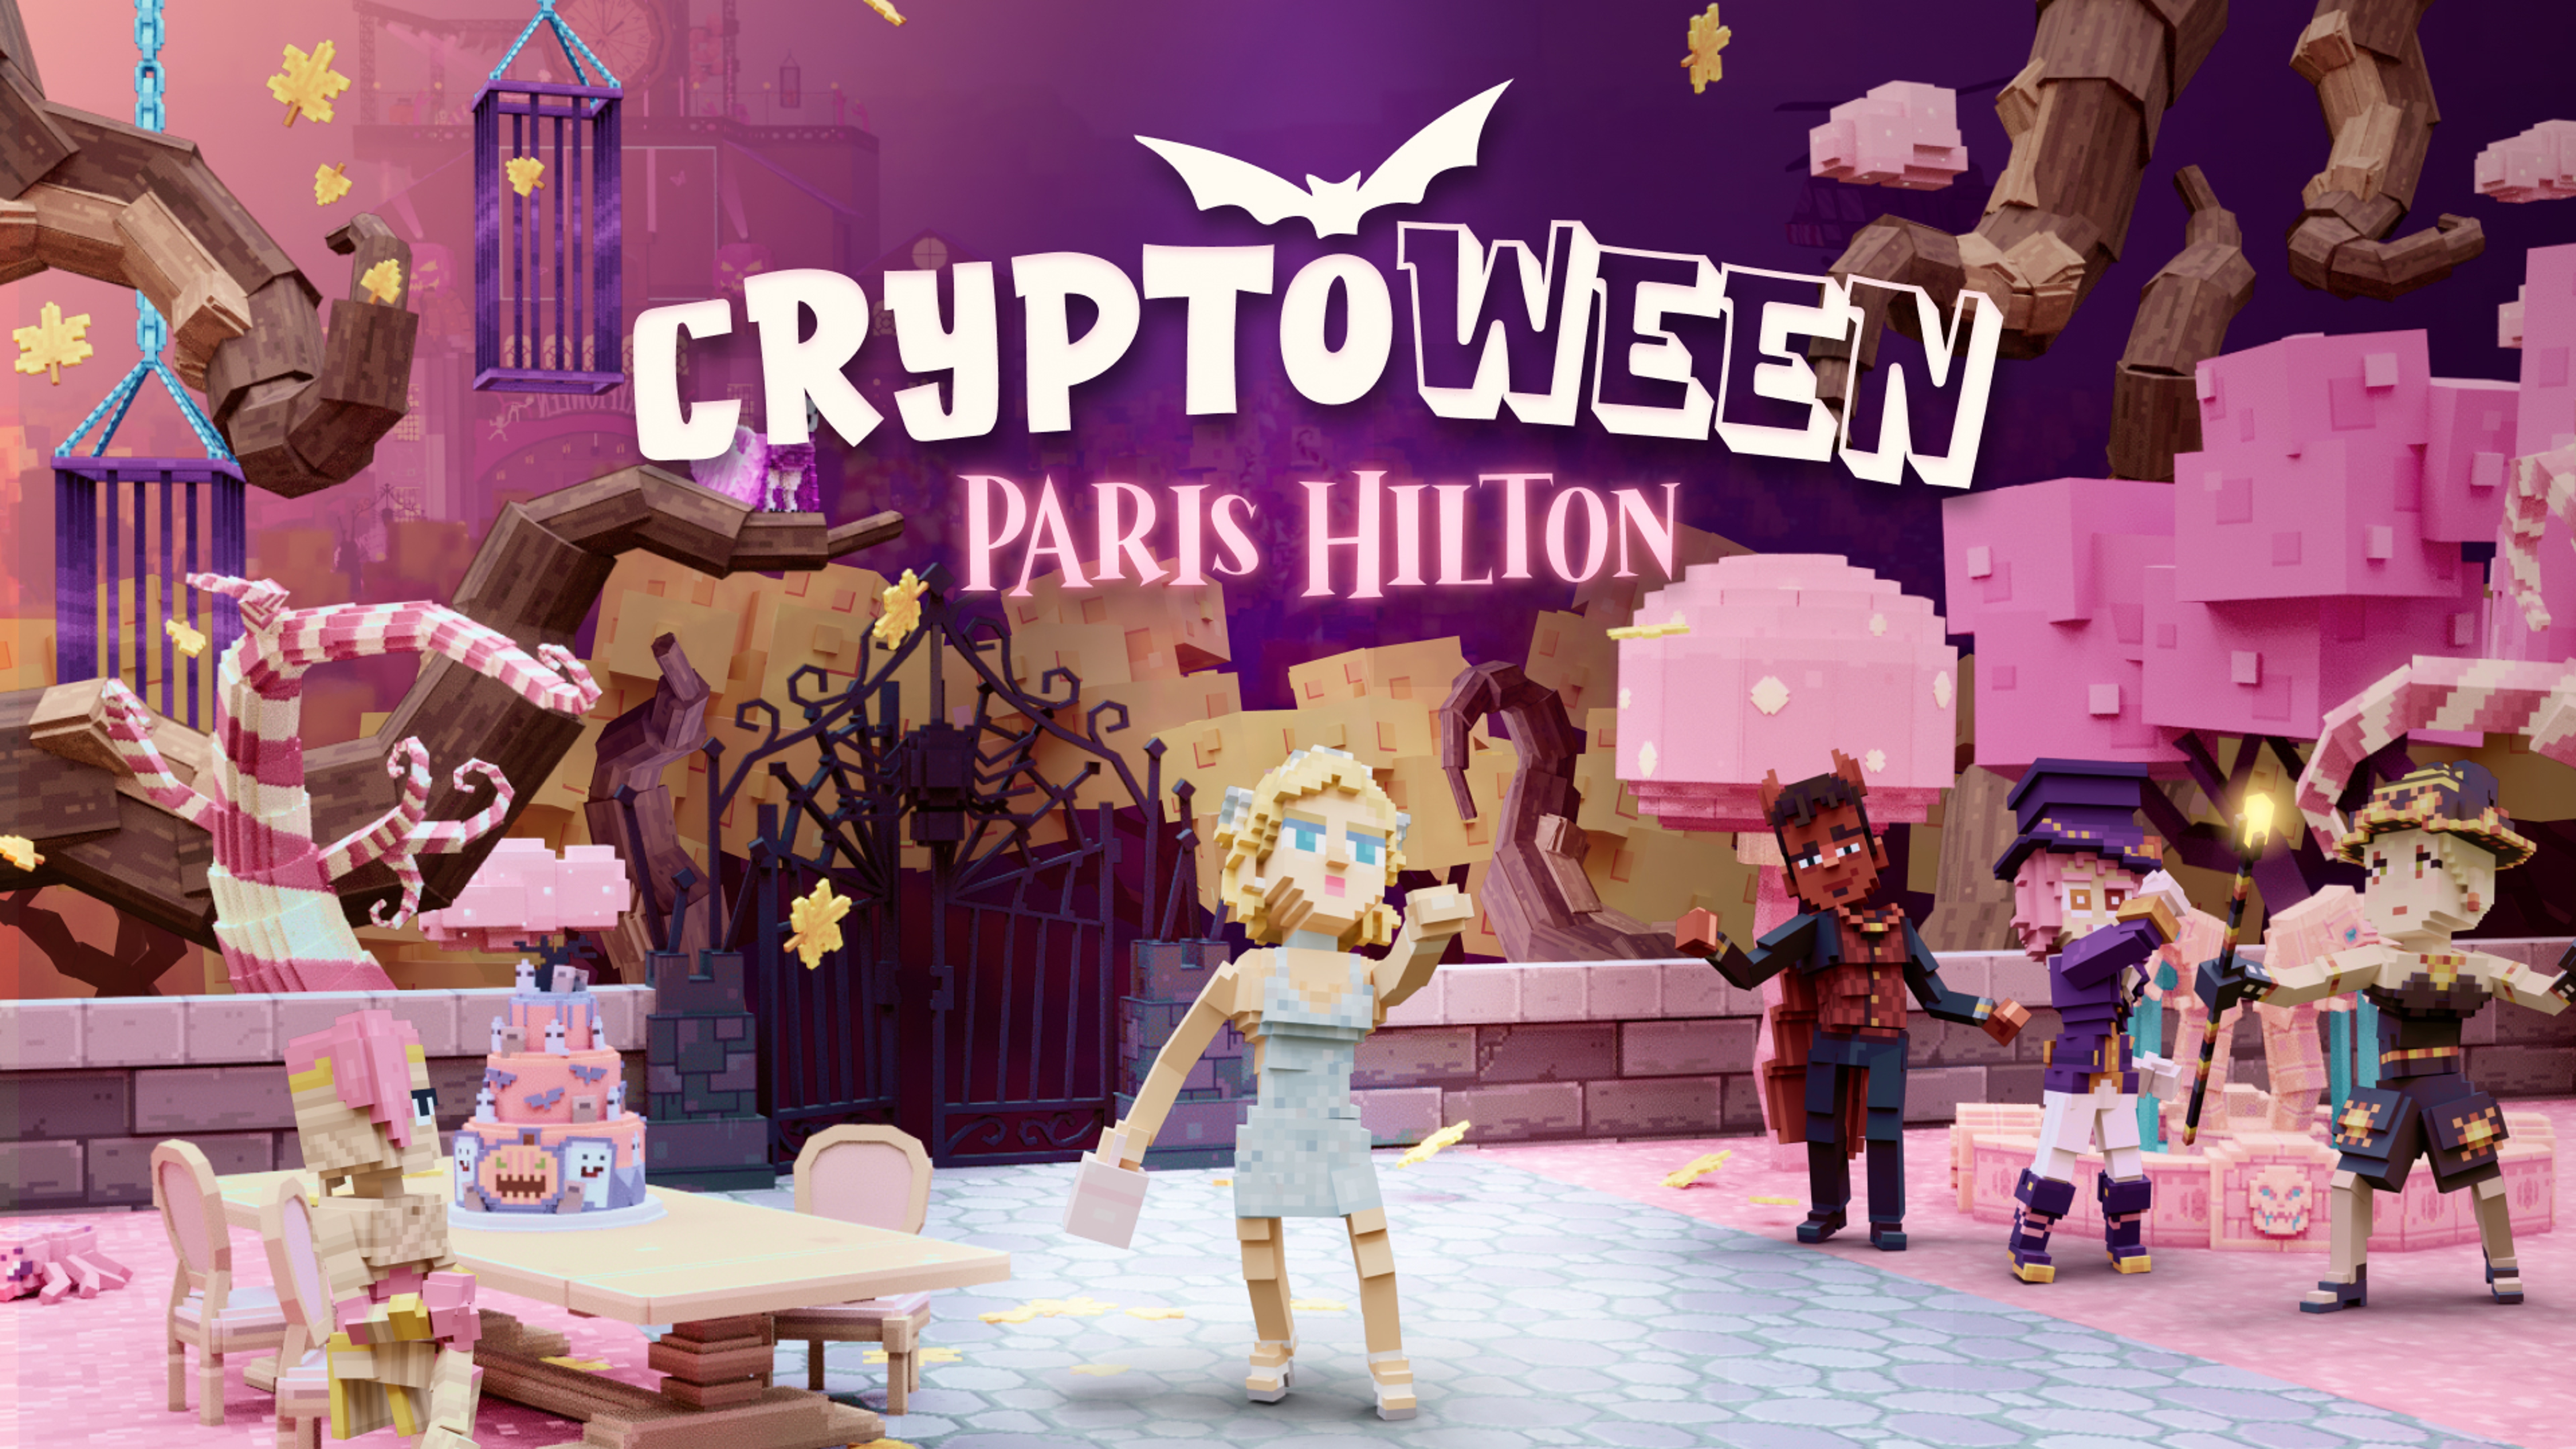 Paris Hilton Is The Sandbox&#39;s &#39;Queen of the Metaverse:&#39; All About Her New Cryptoween Experience And Her Partnership With Animoca